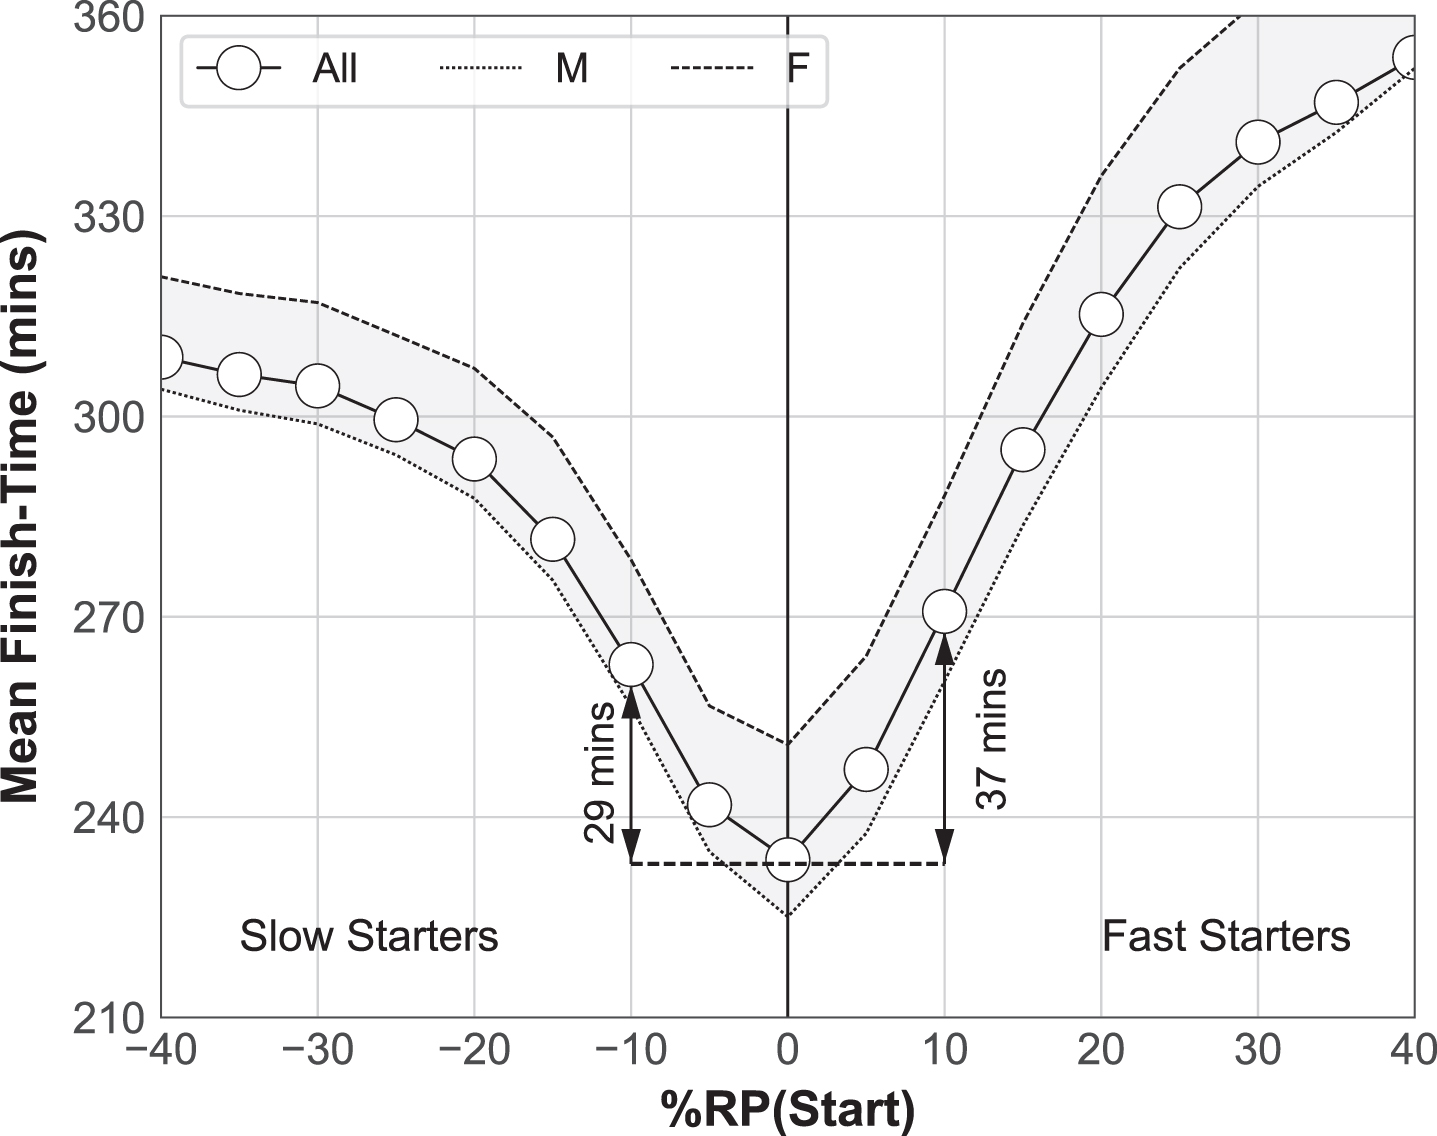 The mean finish-time of runners (all, male, female) versus relative start pace.